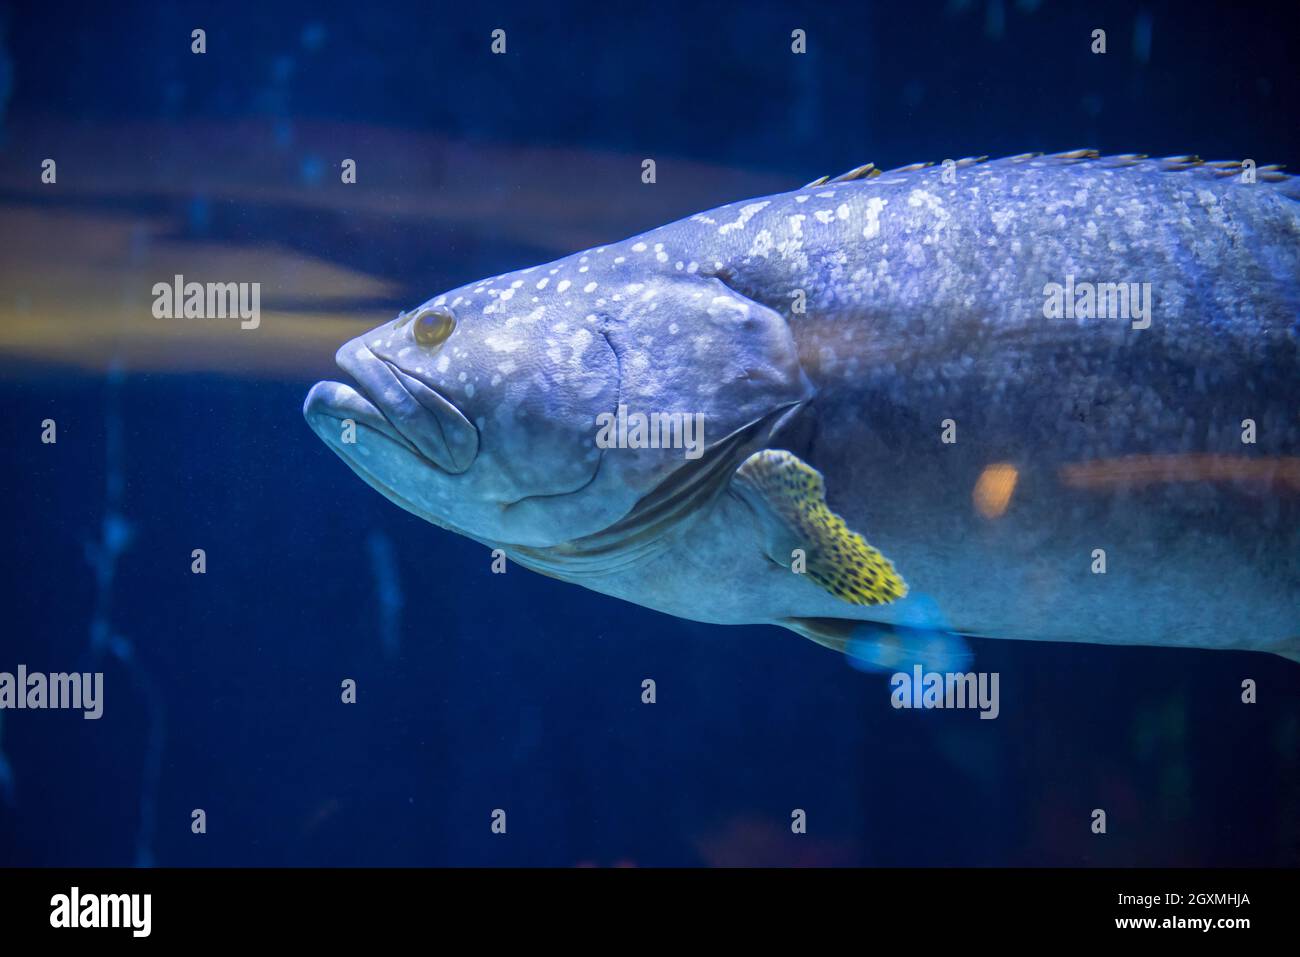 underwater photography of a fish swimming in freshwater aquarium Stock Photo